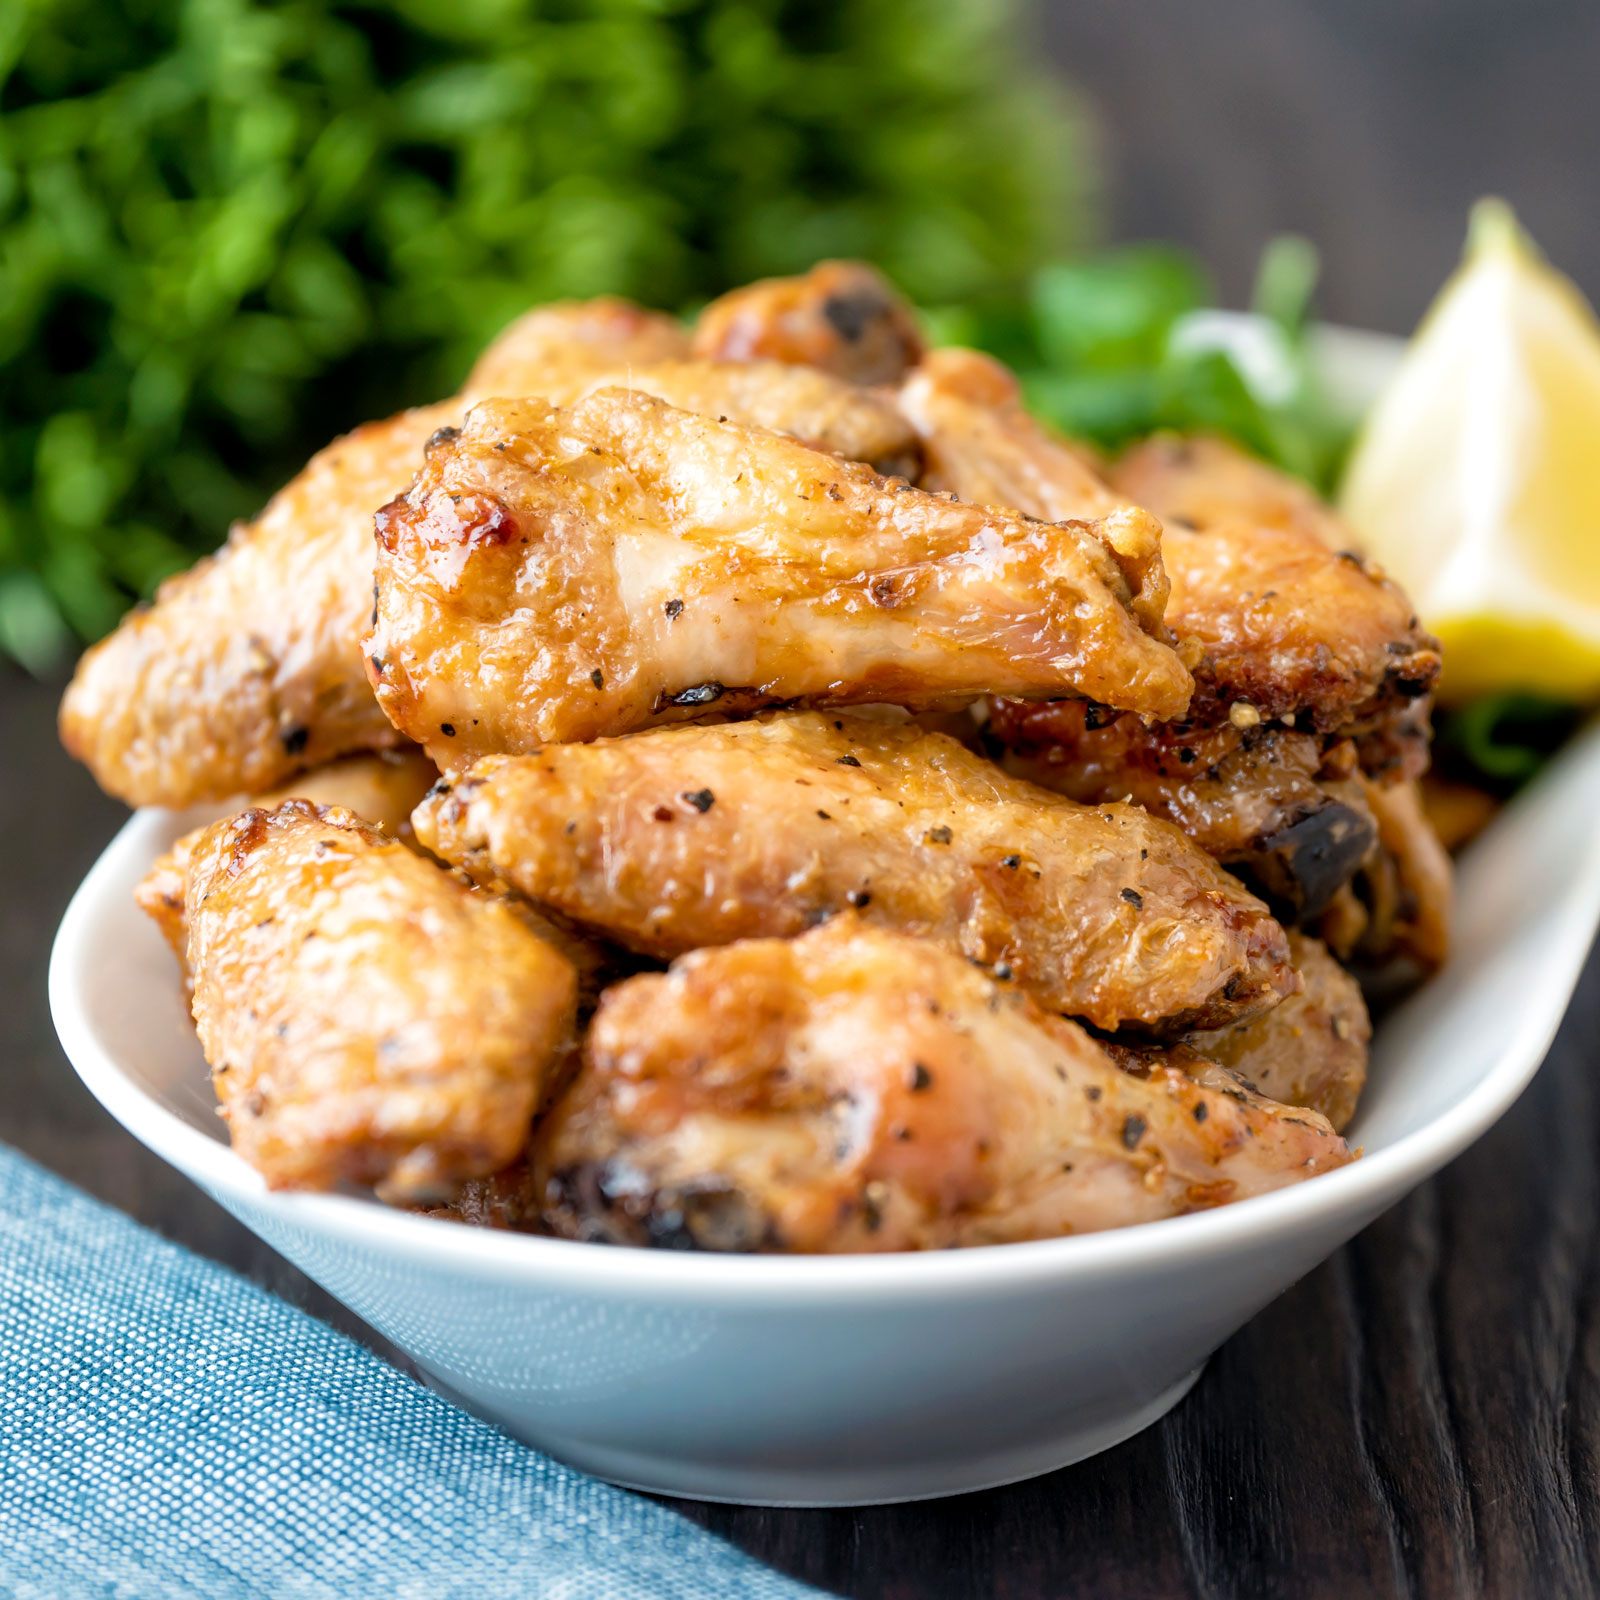 Crispy lemon pepper wings served with a green salad and lemon wedge.